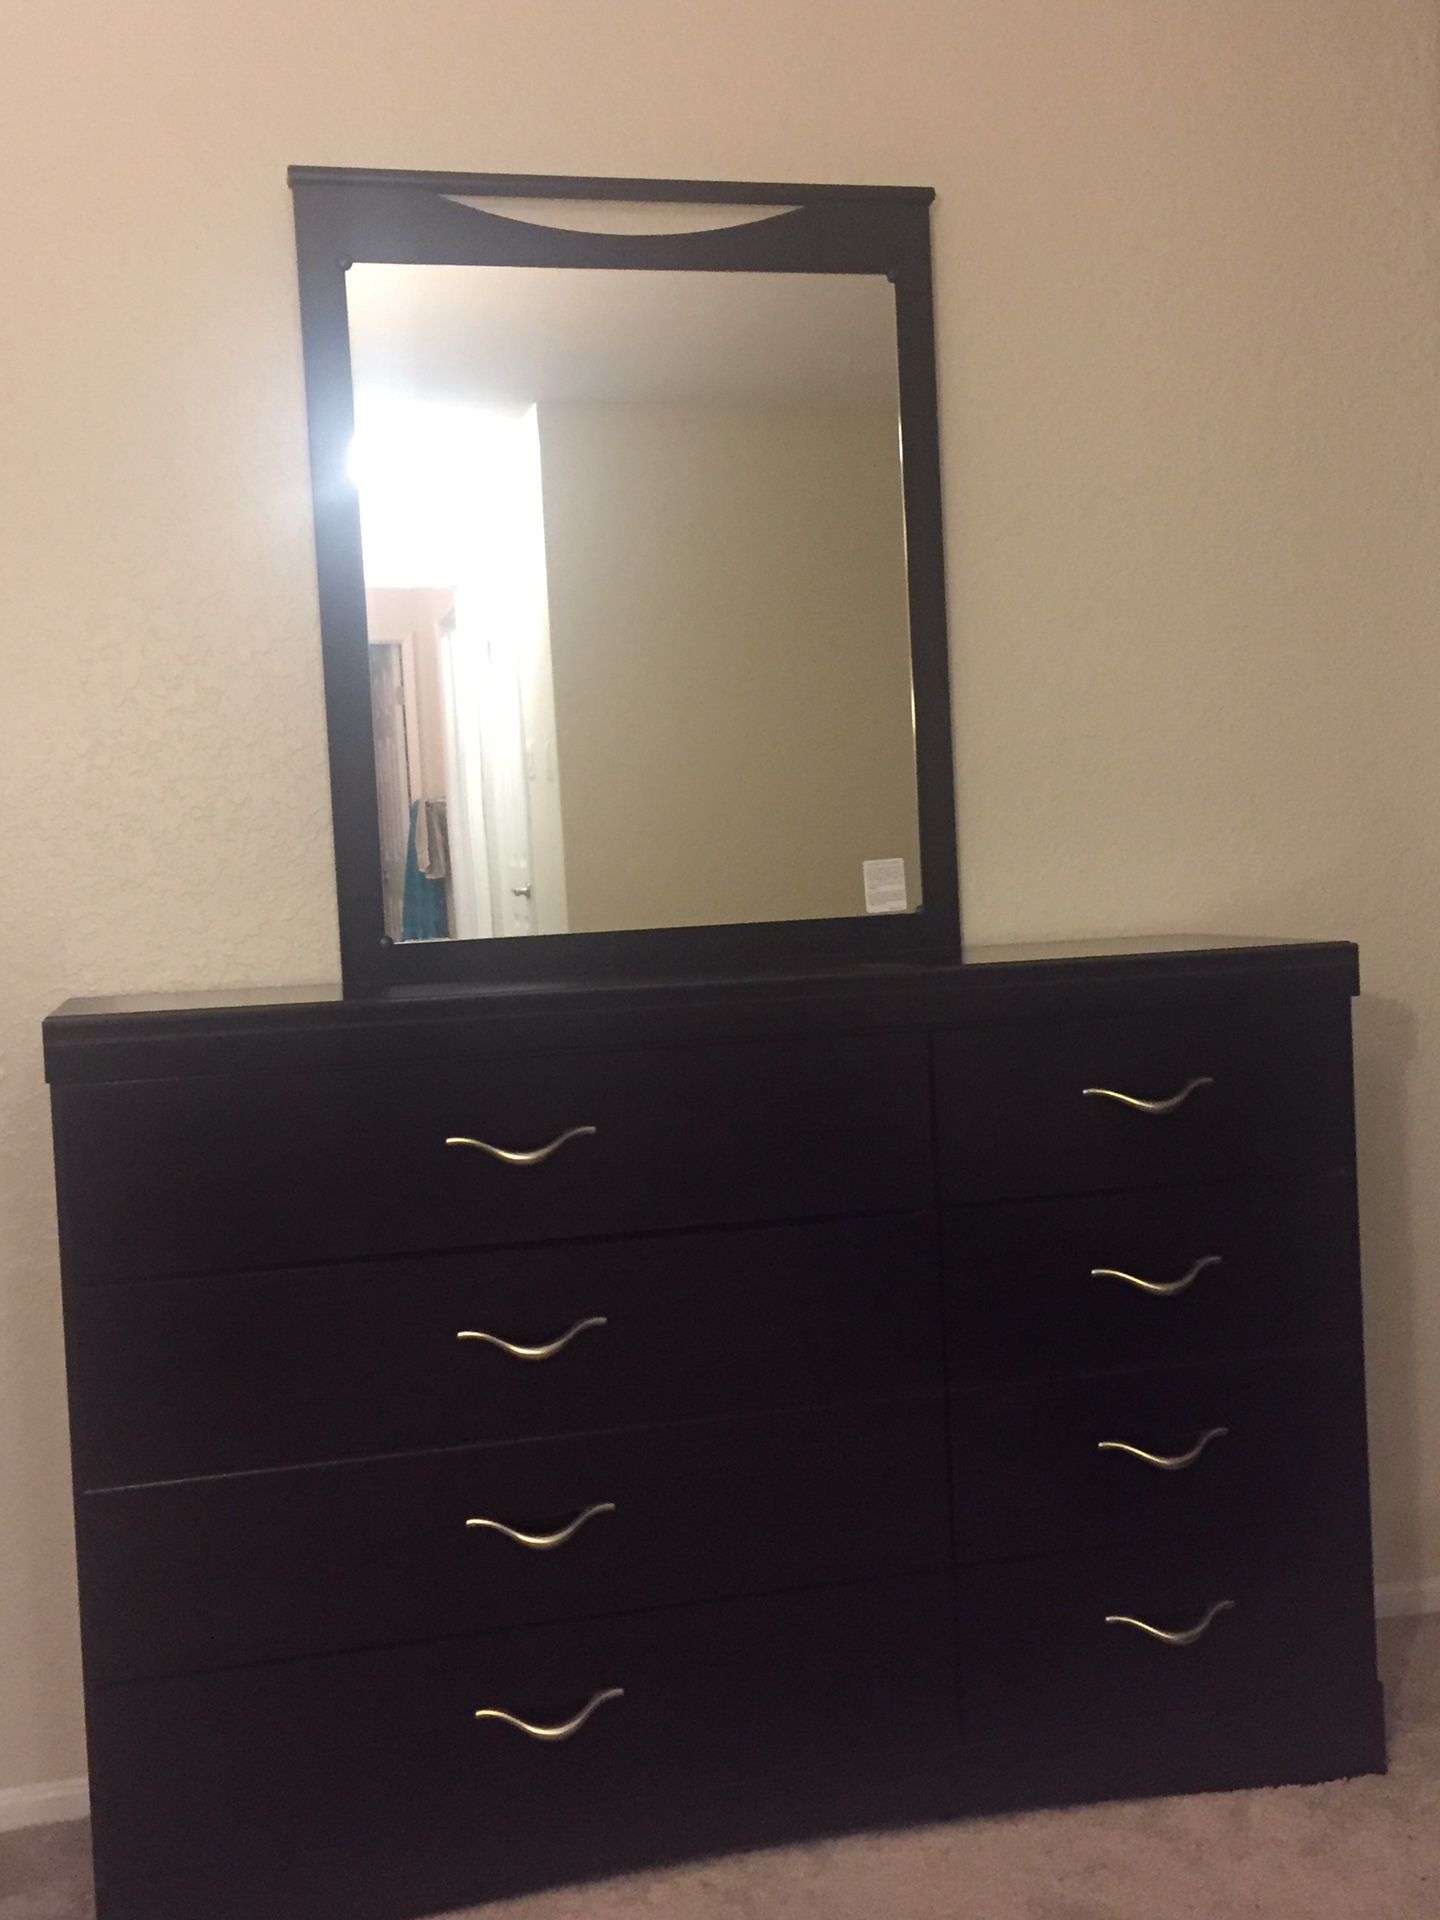 Brand new dresser with mirror (Ashely furniture)